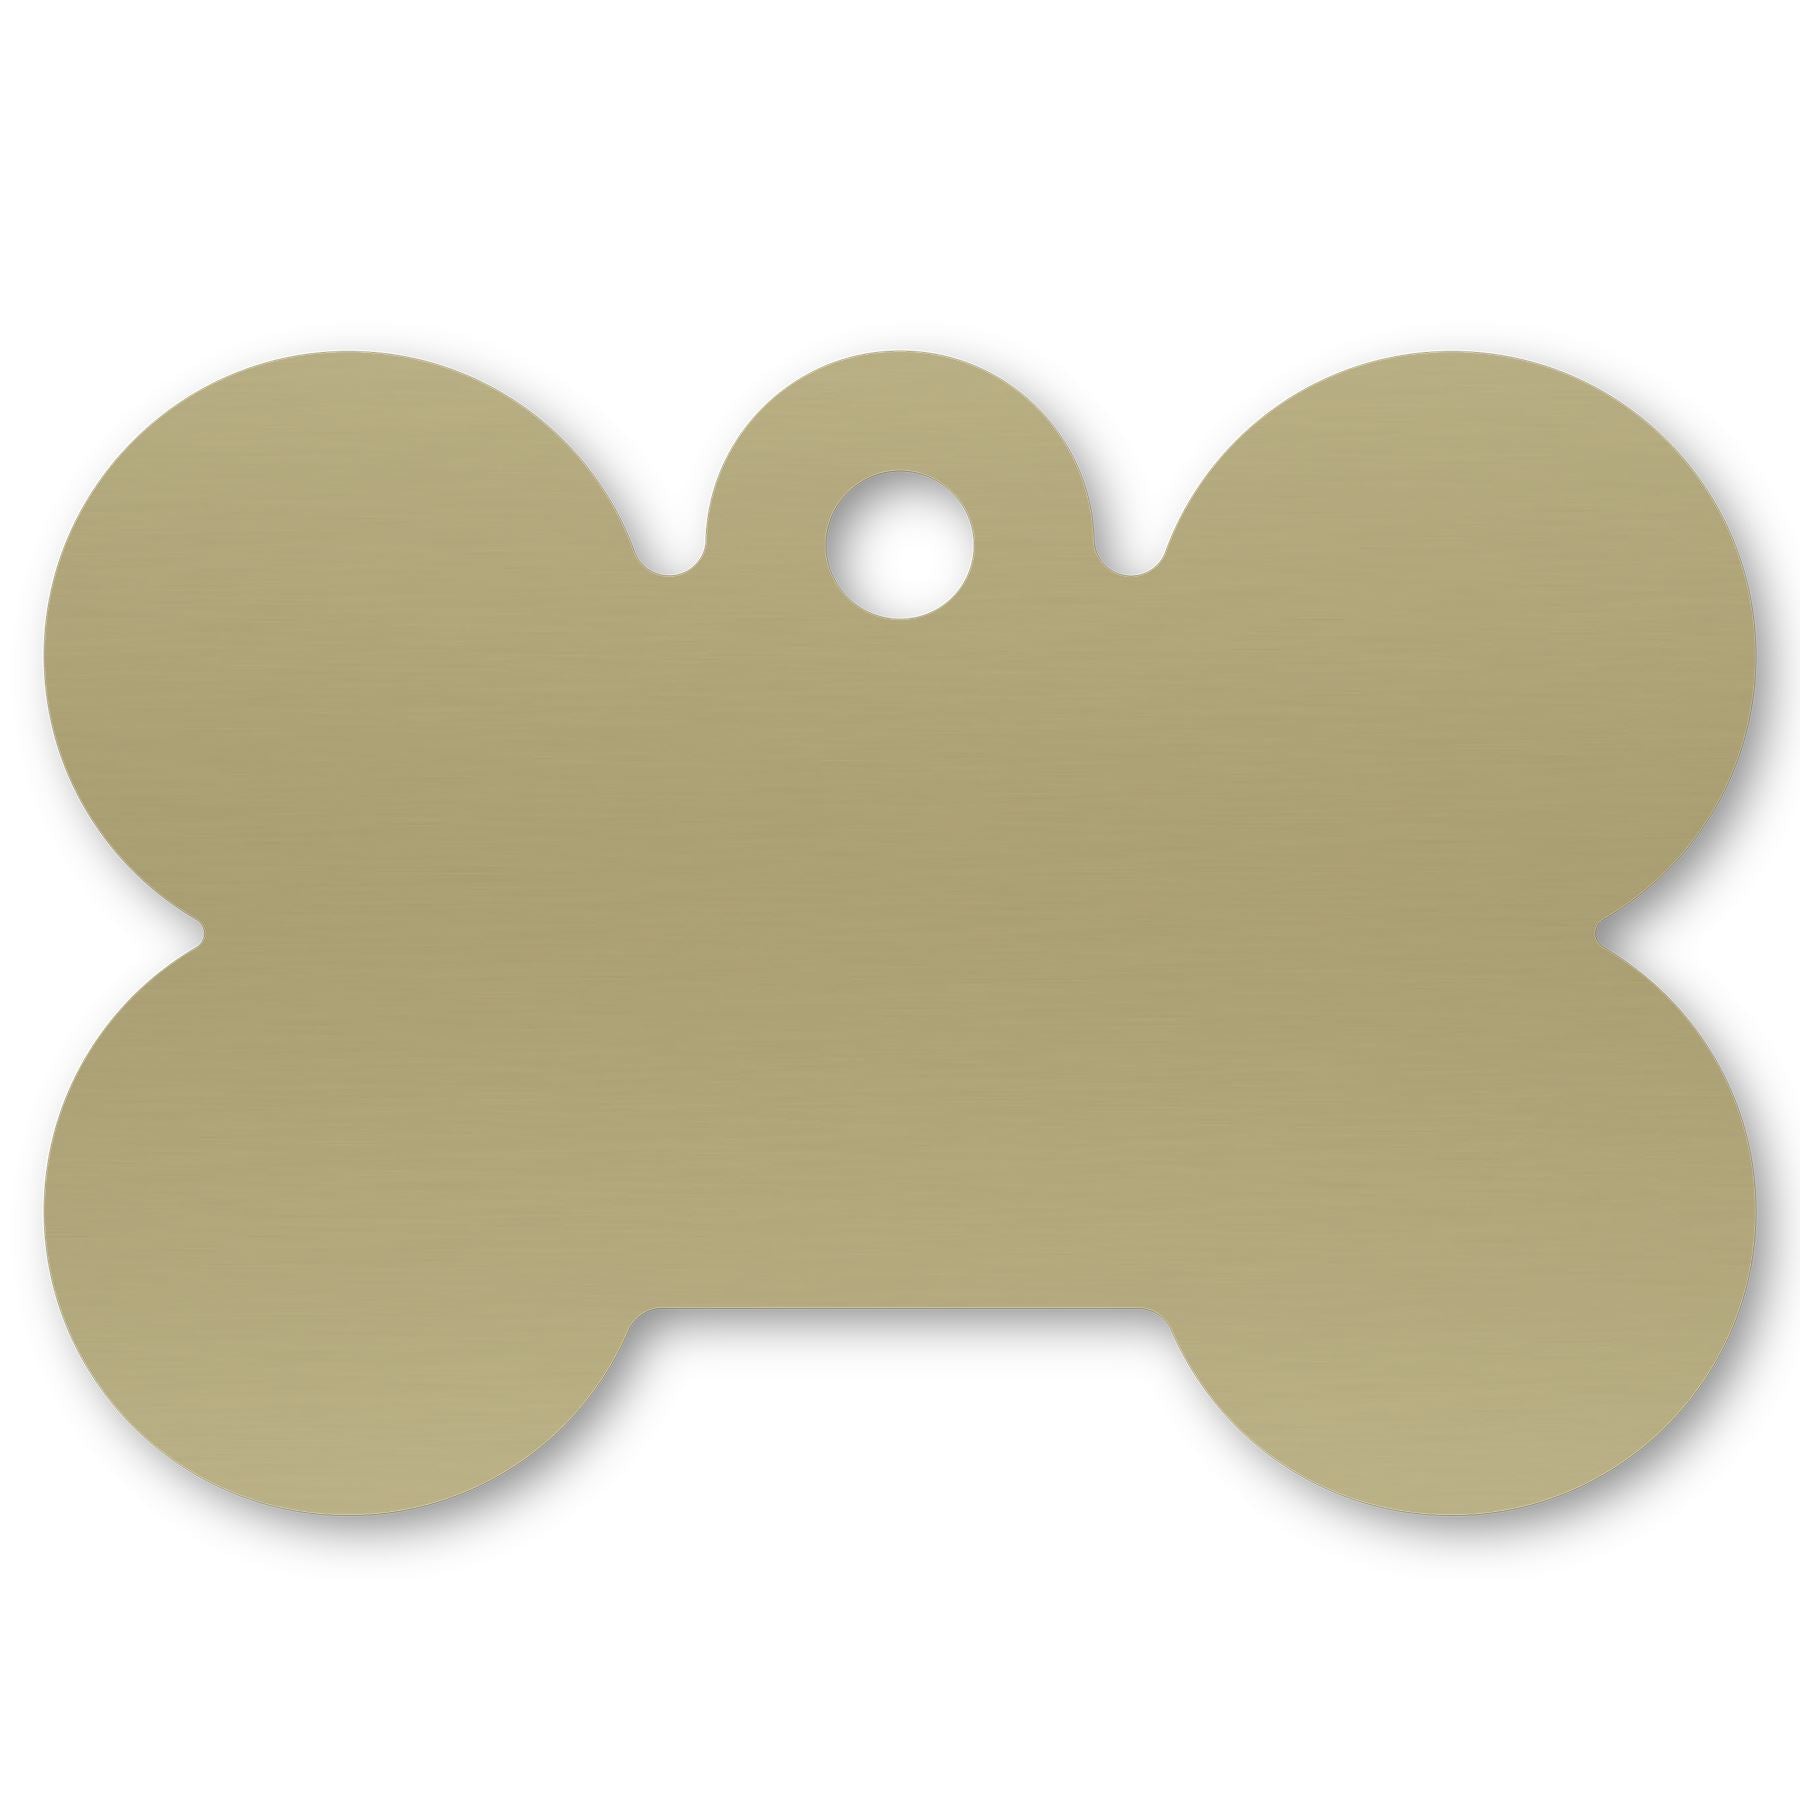 Anodized Aluminum Dog Bone Shaped Tags, 1-3/8" x 2-1/16" with 1/8" Hole, Laser Engraved Metal Tags Craftworks NW Gold 